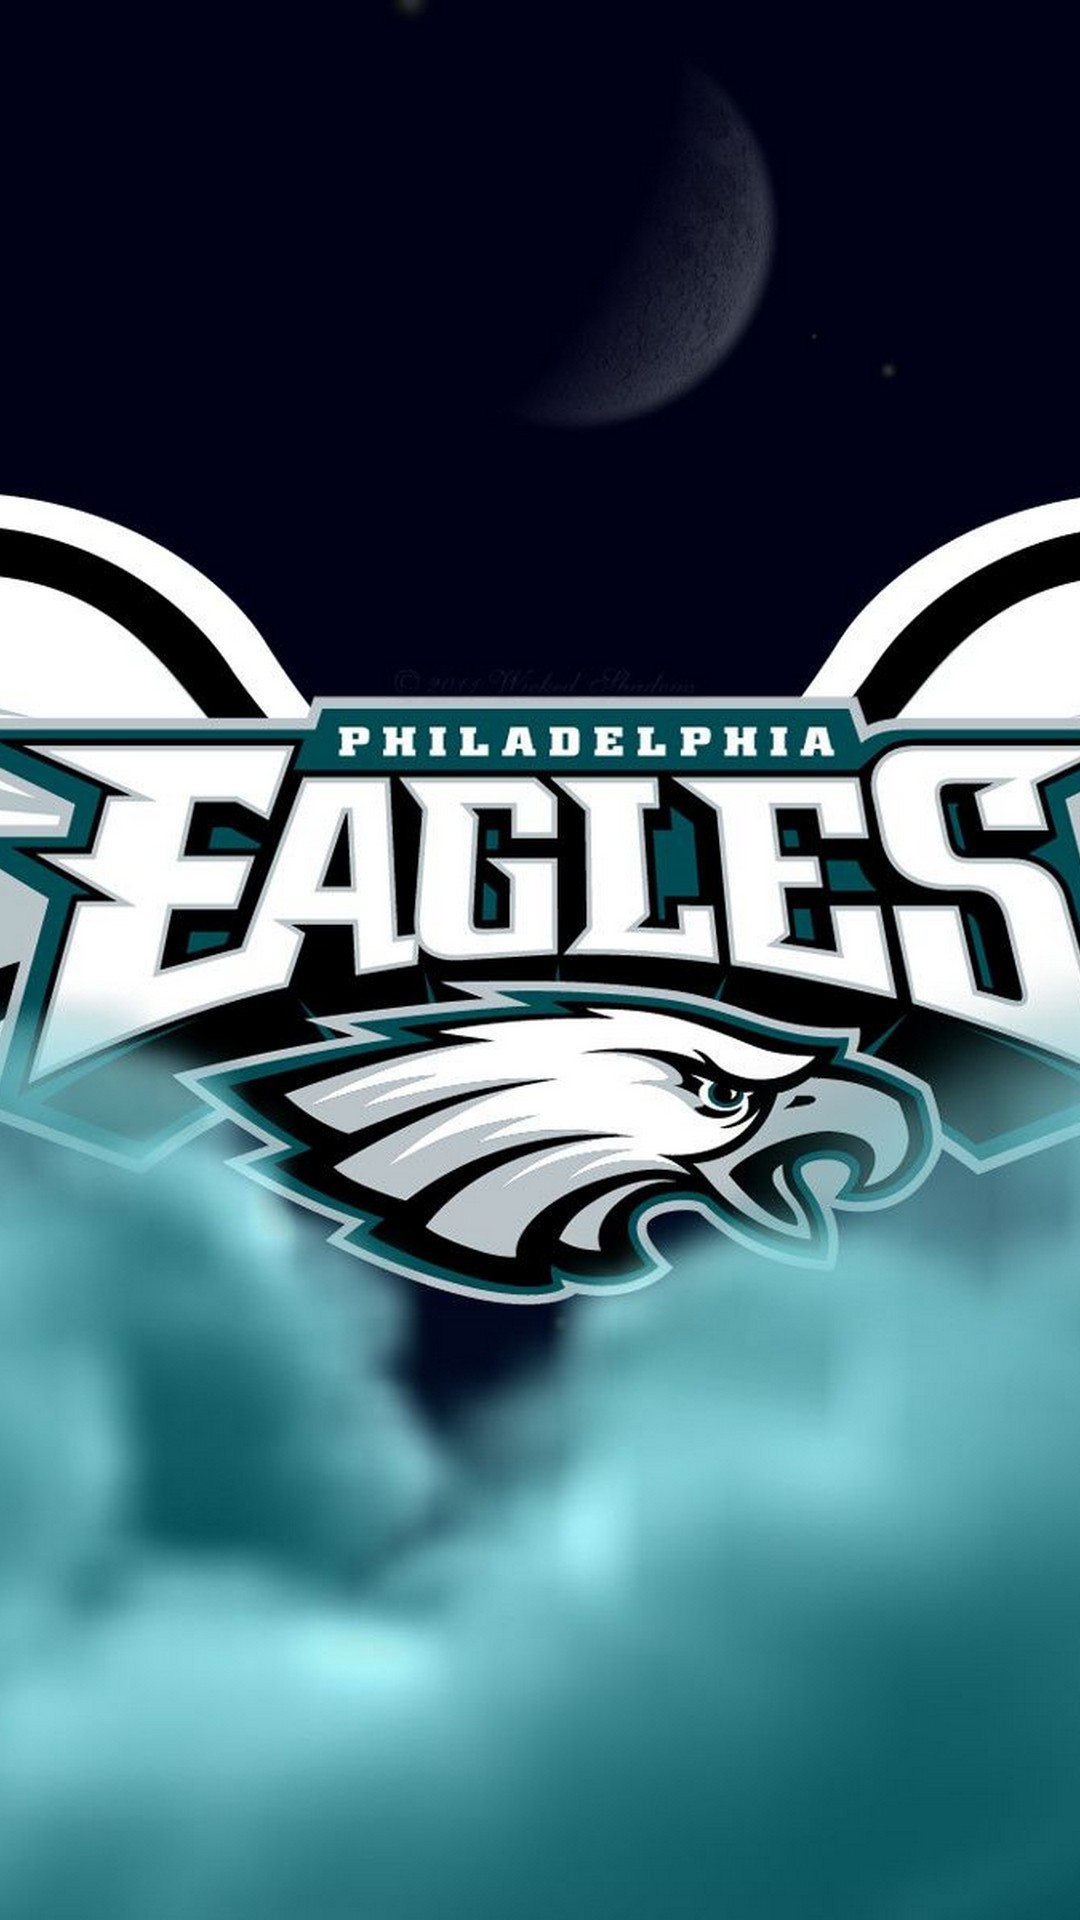 1080x1920 NFL Eagles iPhone X Wallpaper with resolution  pixel. You can make  this wallpaper for